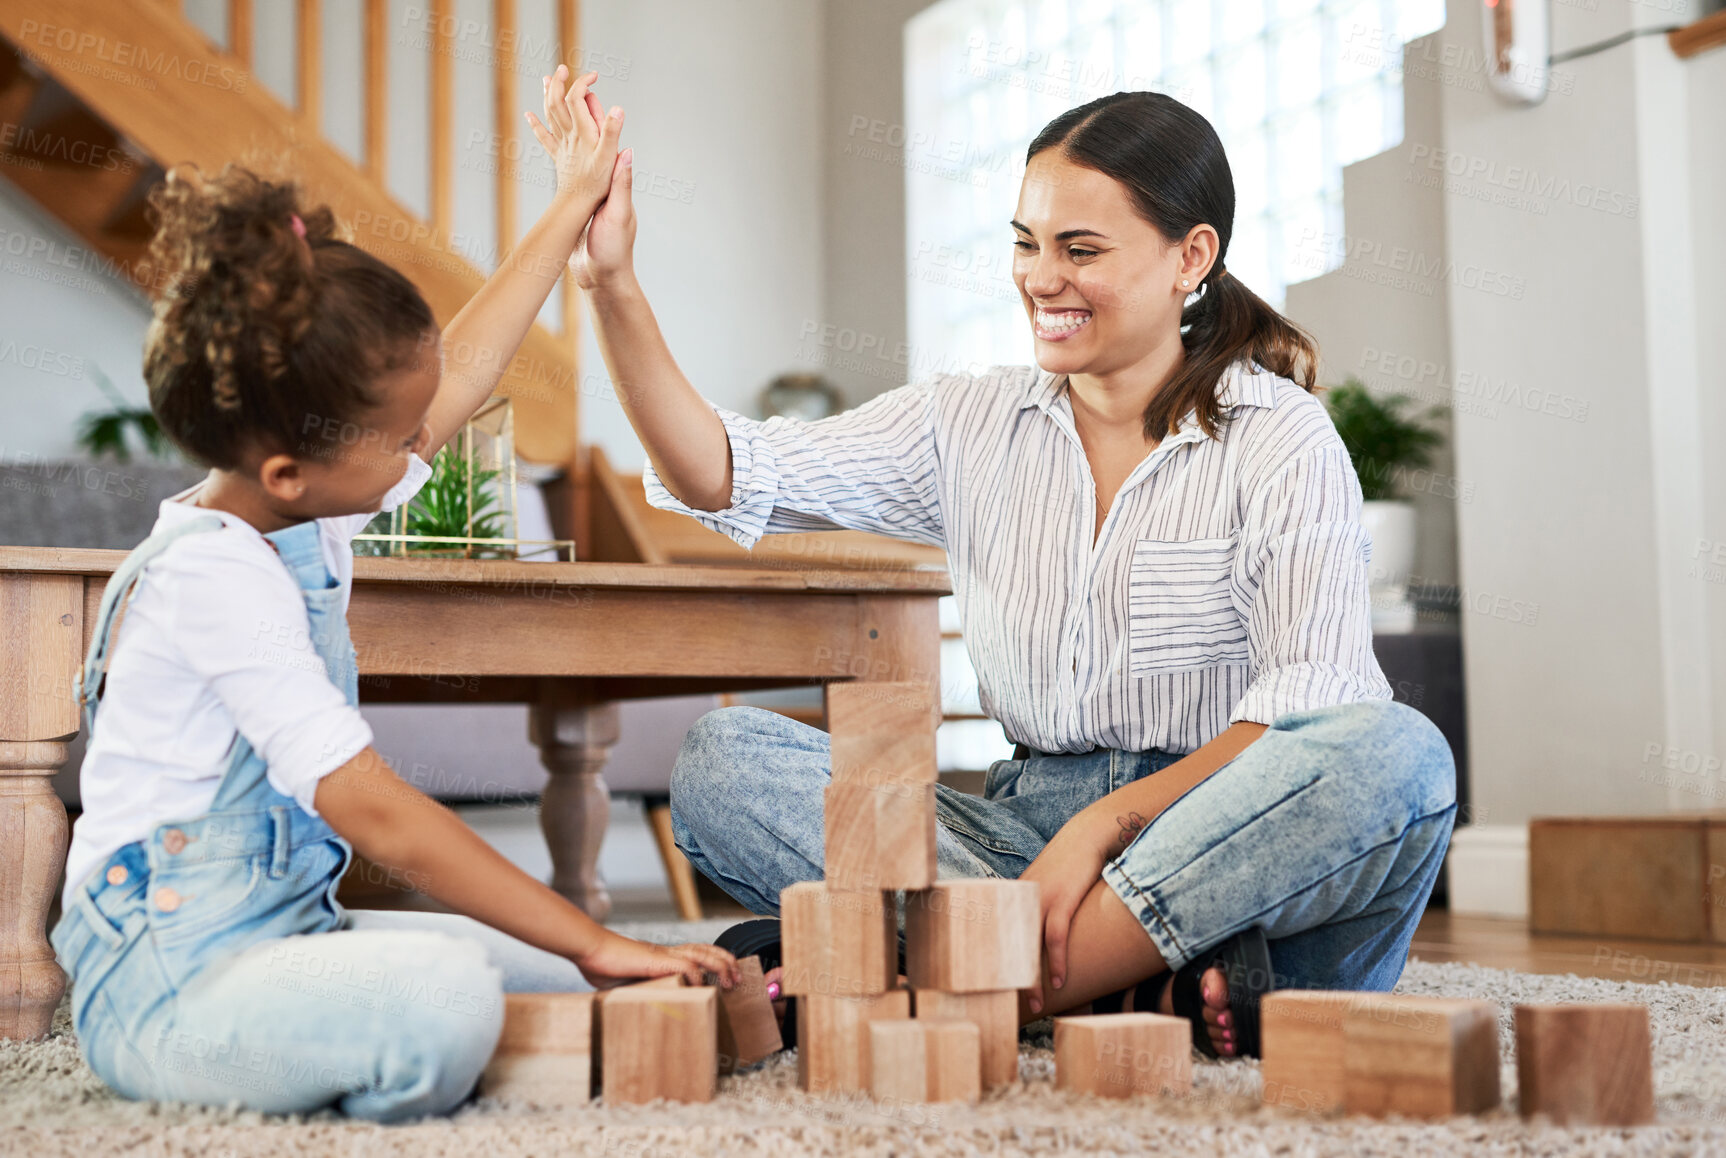 Buy stock photo Shot of a mother and her daughter giving each other a high five while playing with wooden blocks together at home